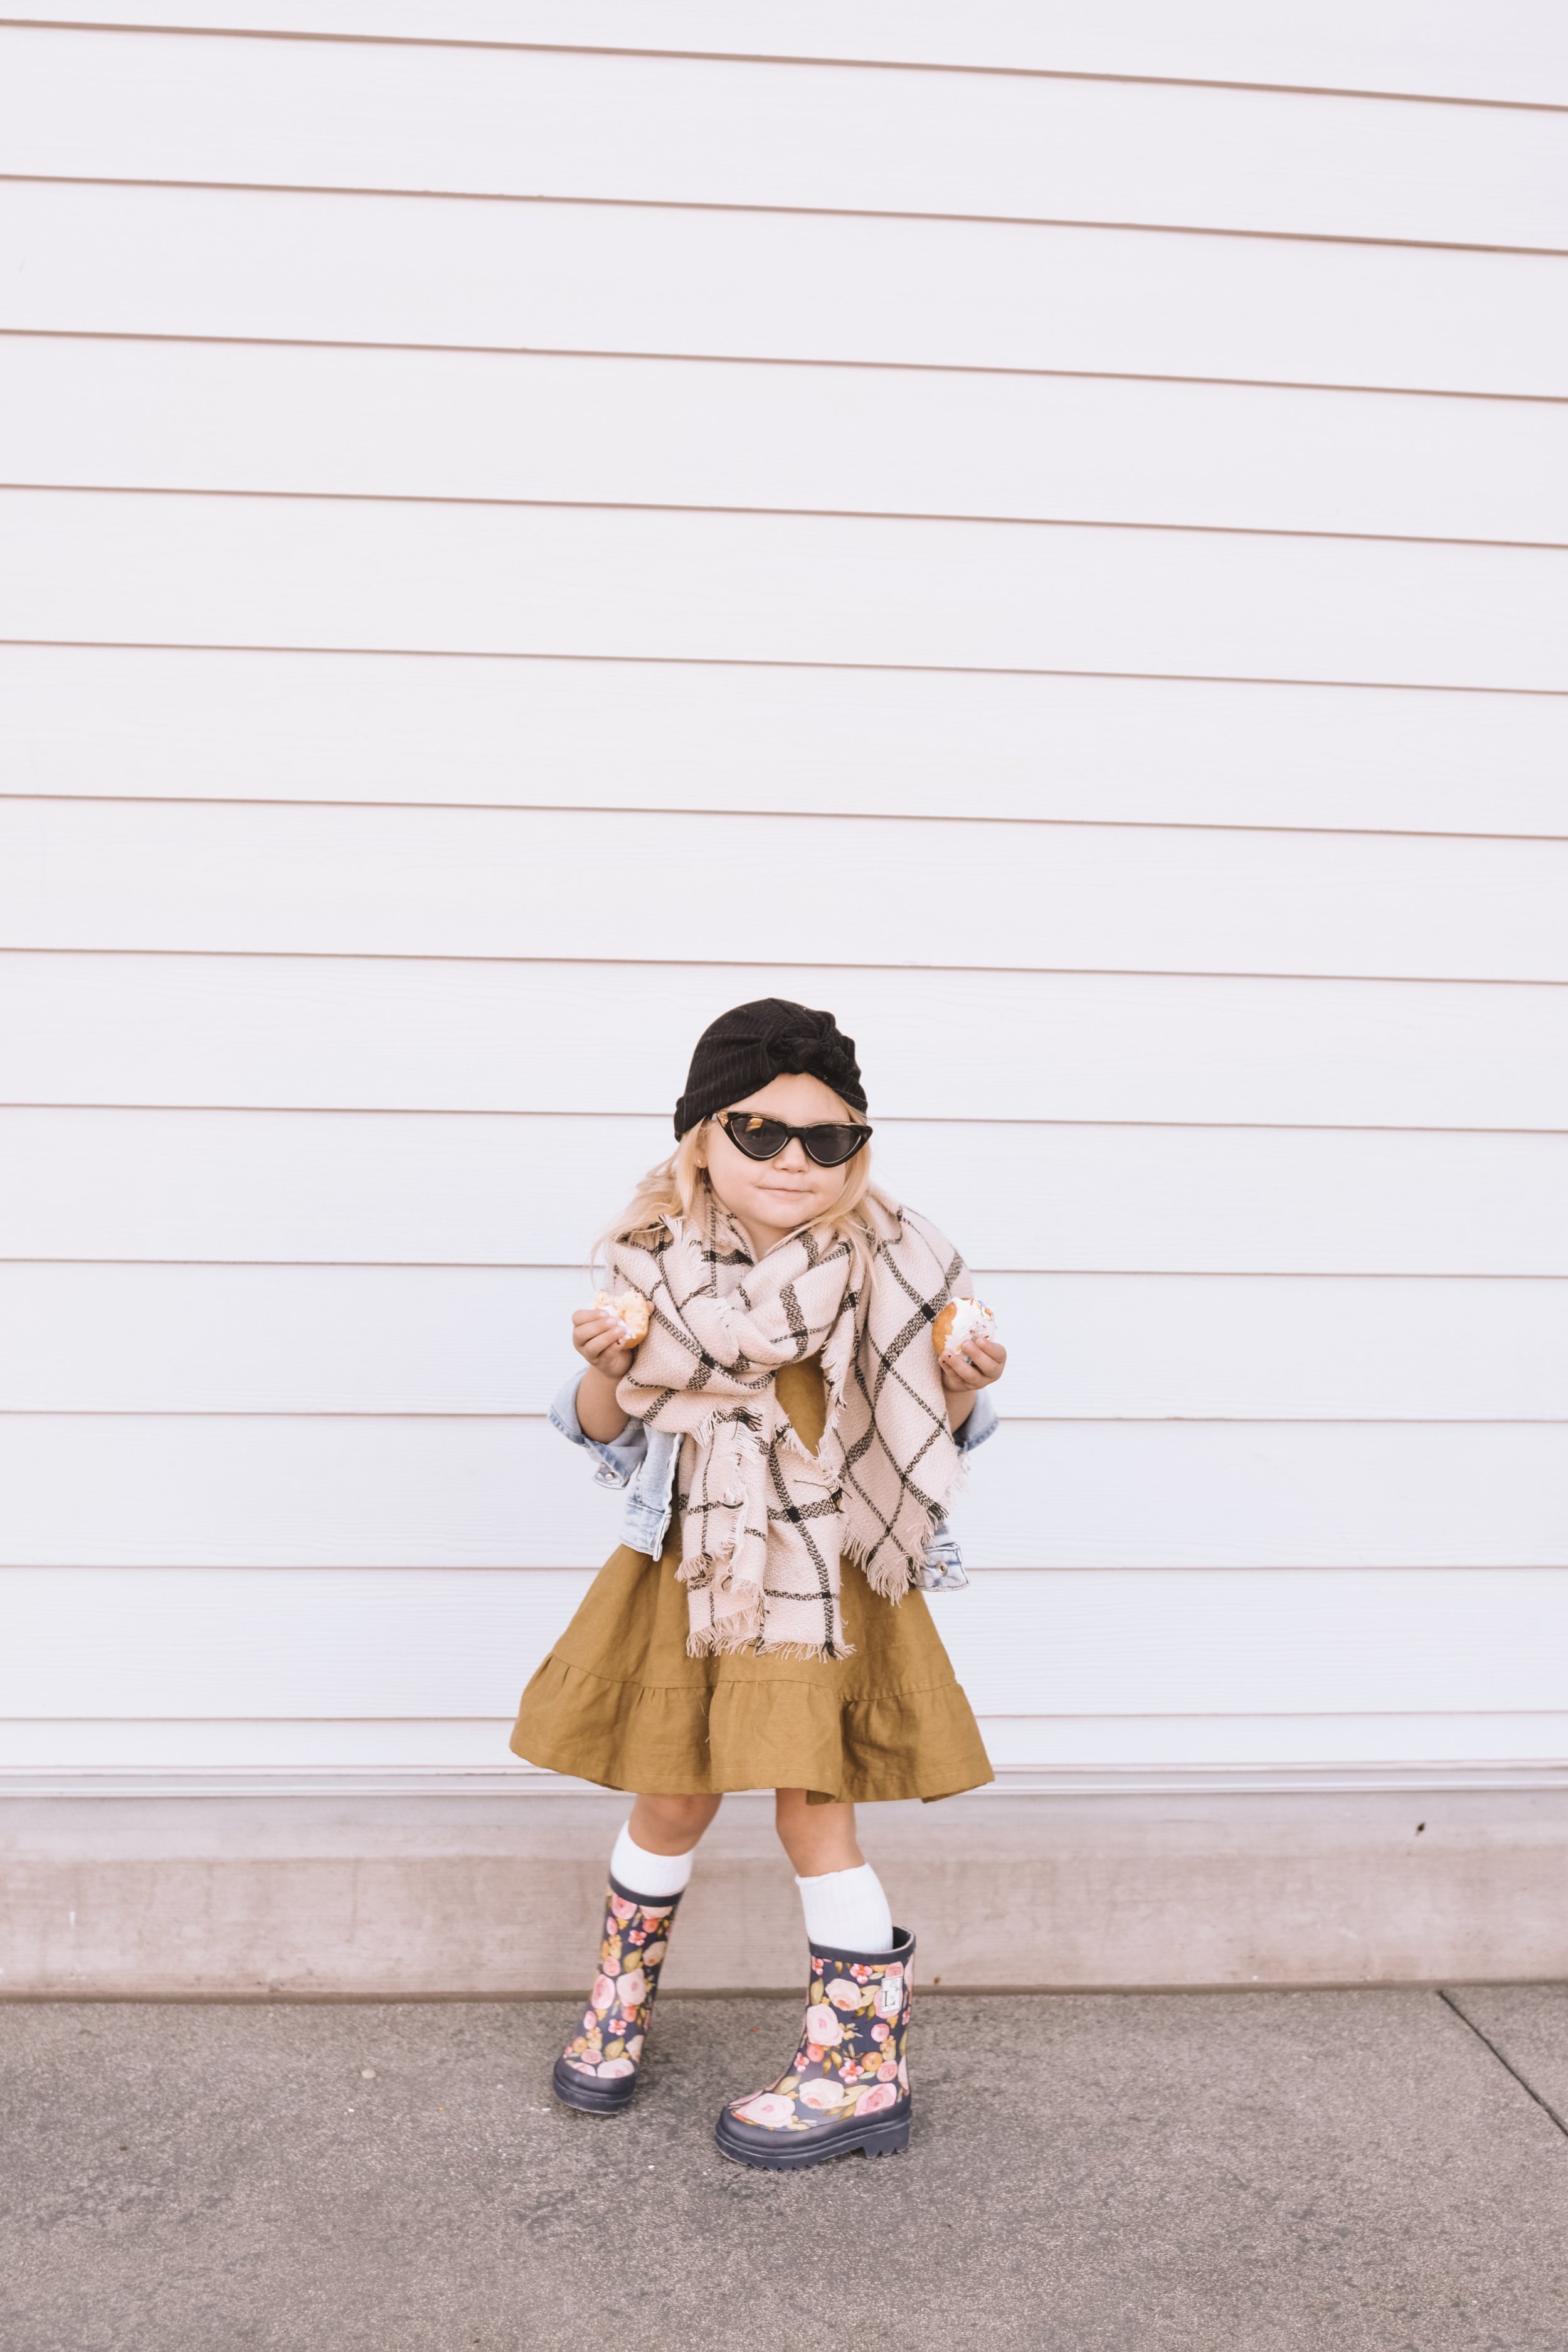 Cute Kids Fashion Clothes - The Overwhelmed Mommy Blogger